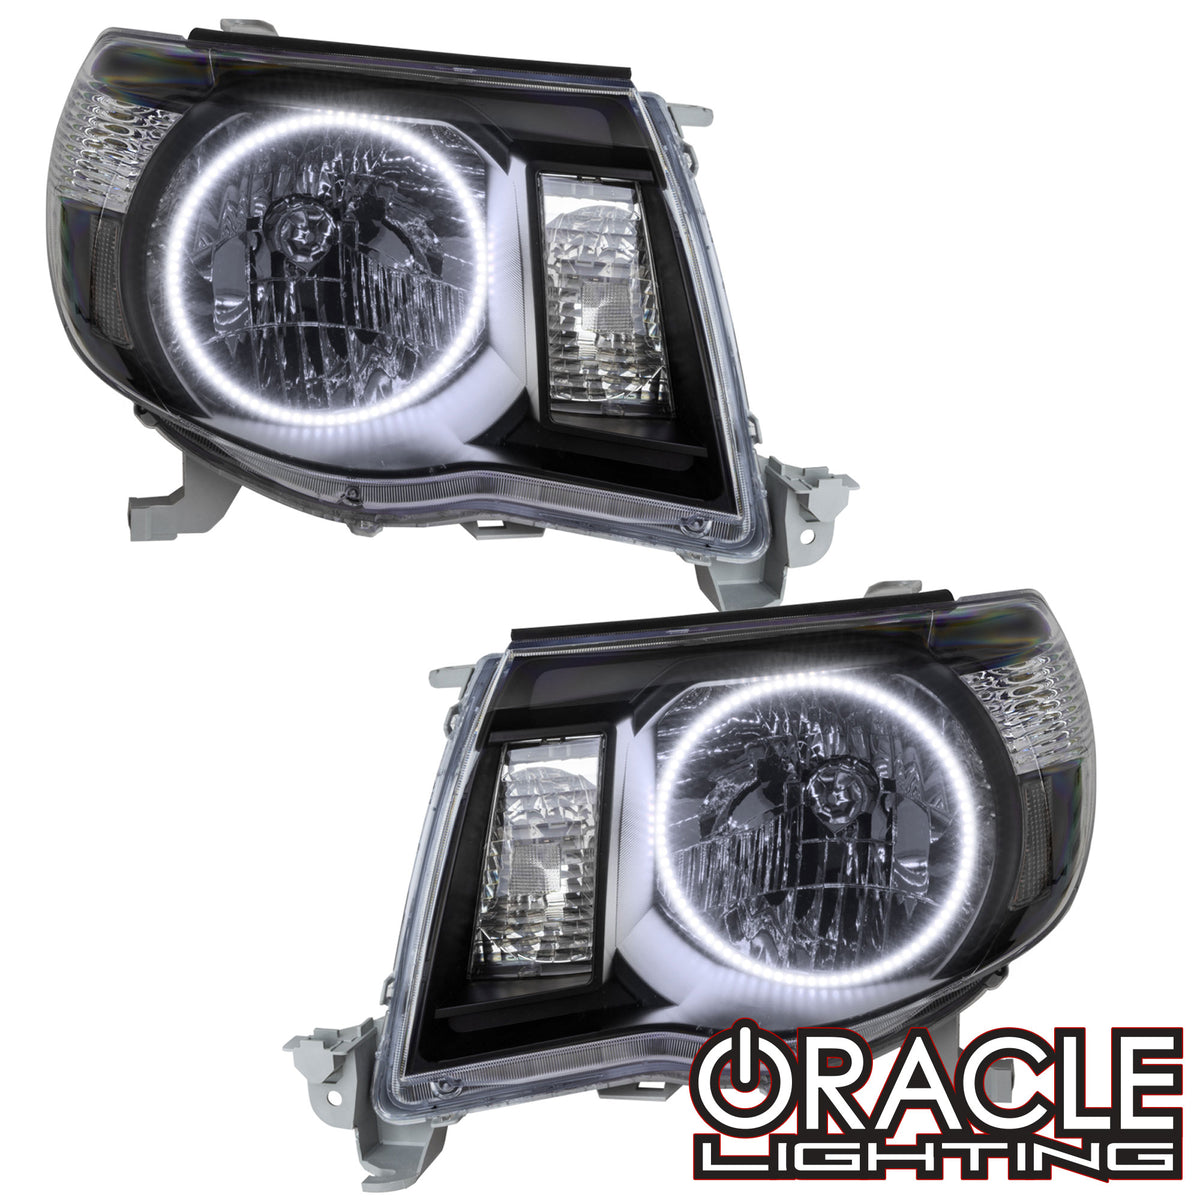 ORACLE Lighting 2005-2011 Toyota Tacoma Pre-Assembled Halo